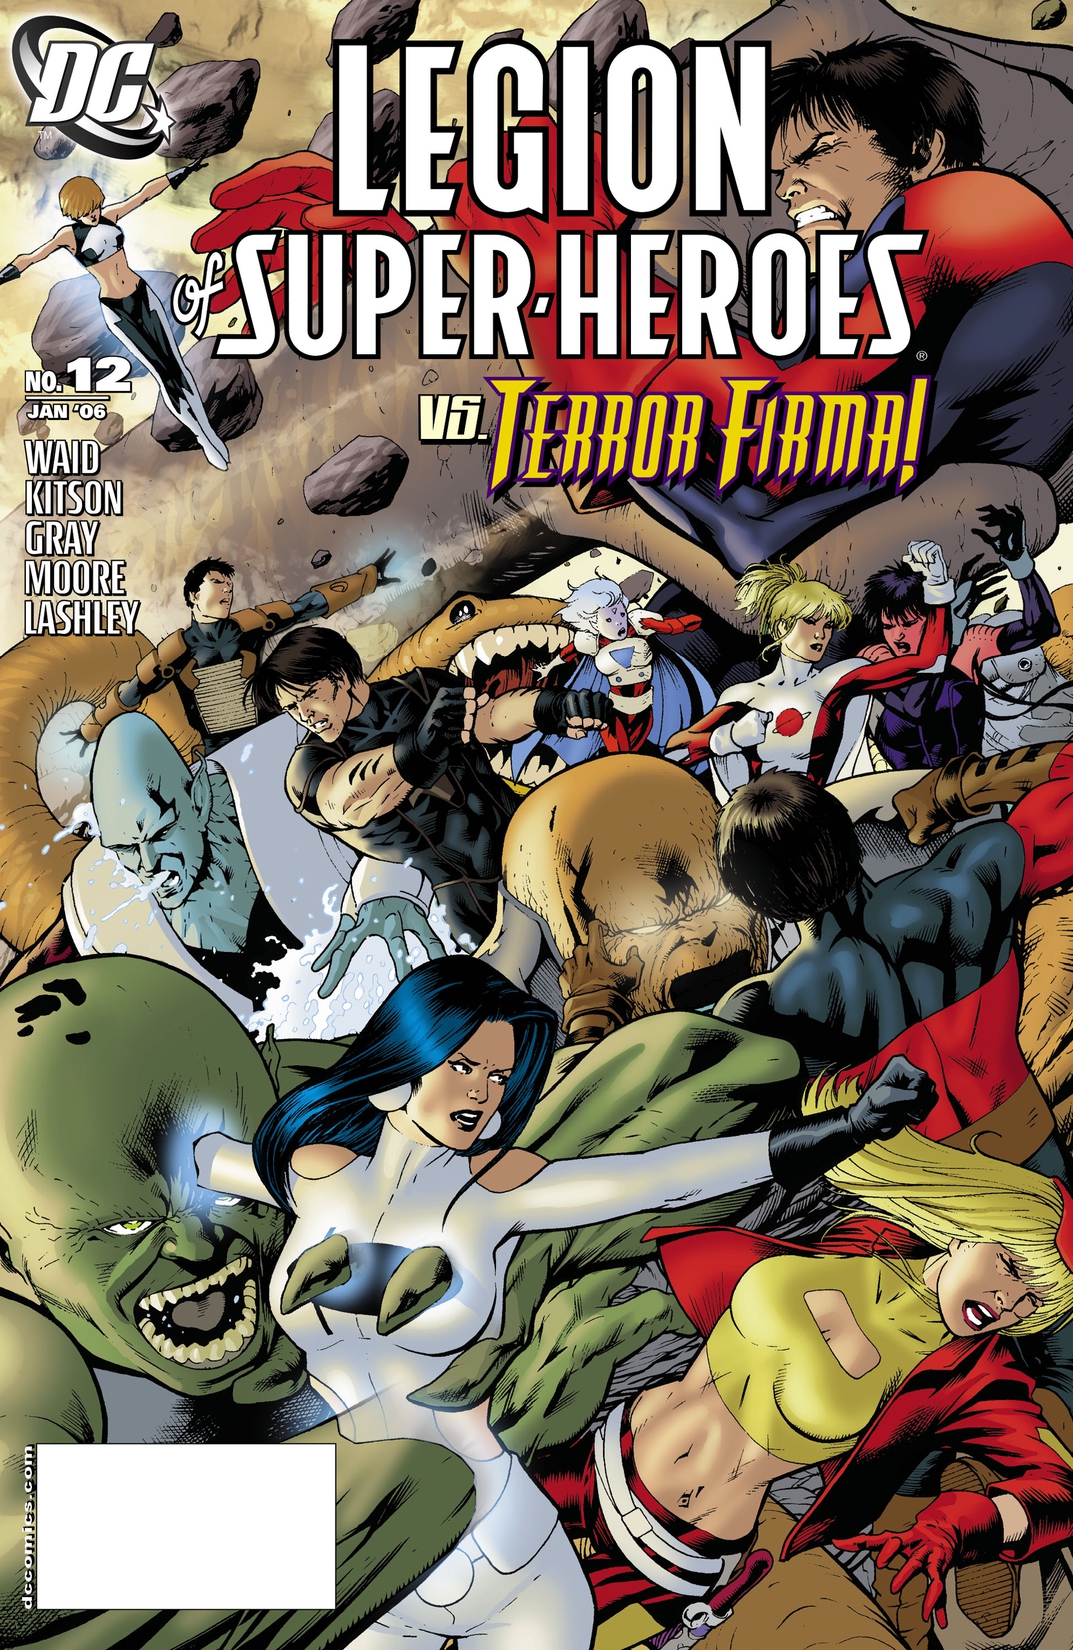 Legion of Super Heroes (2004-) #12 preview images